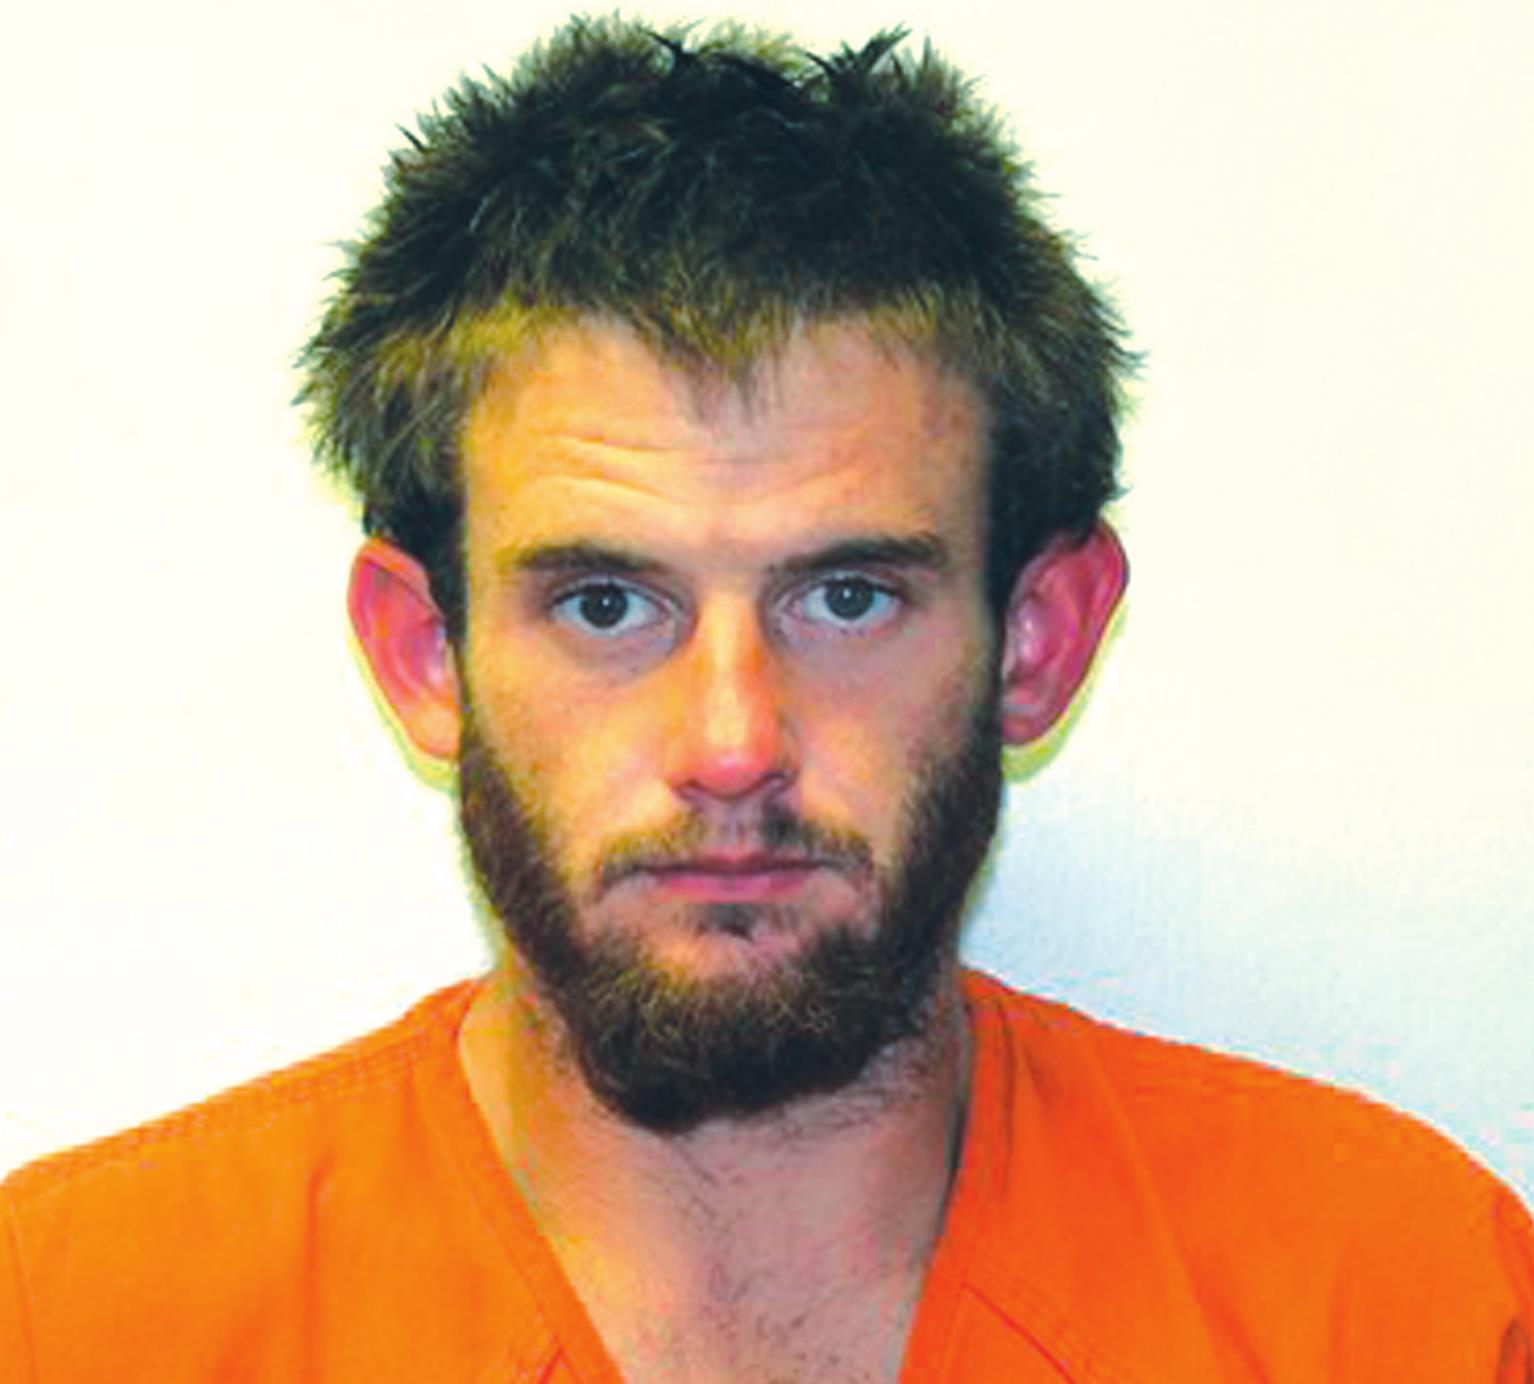 Two Custer County suspects appearing in court Weatherford Daily News